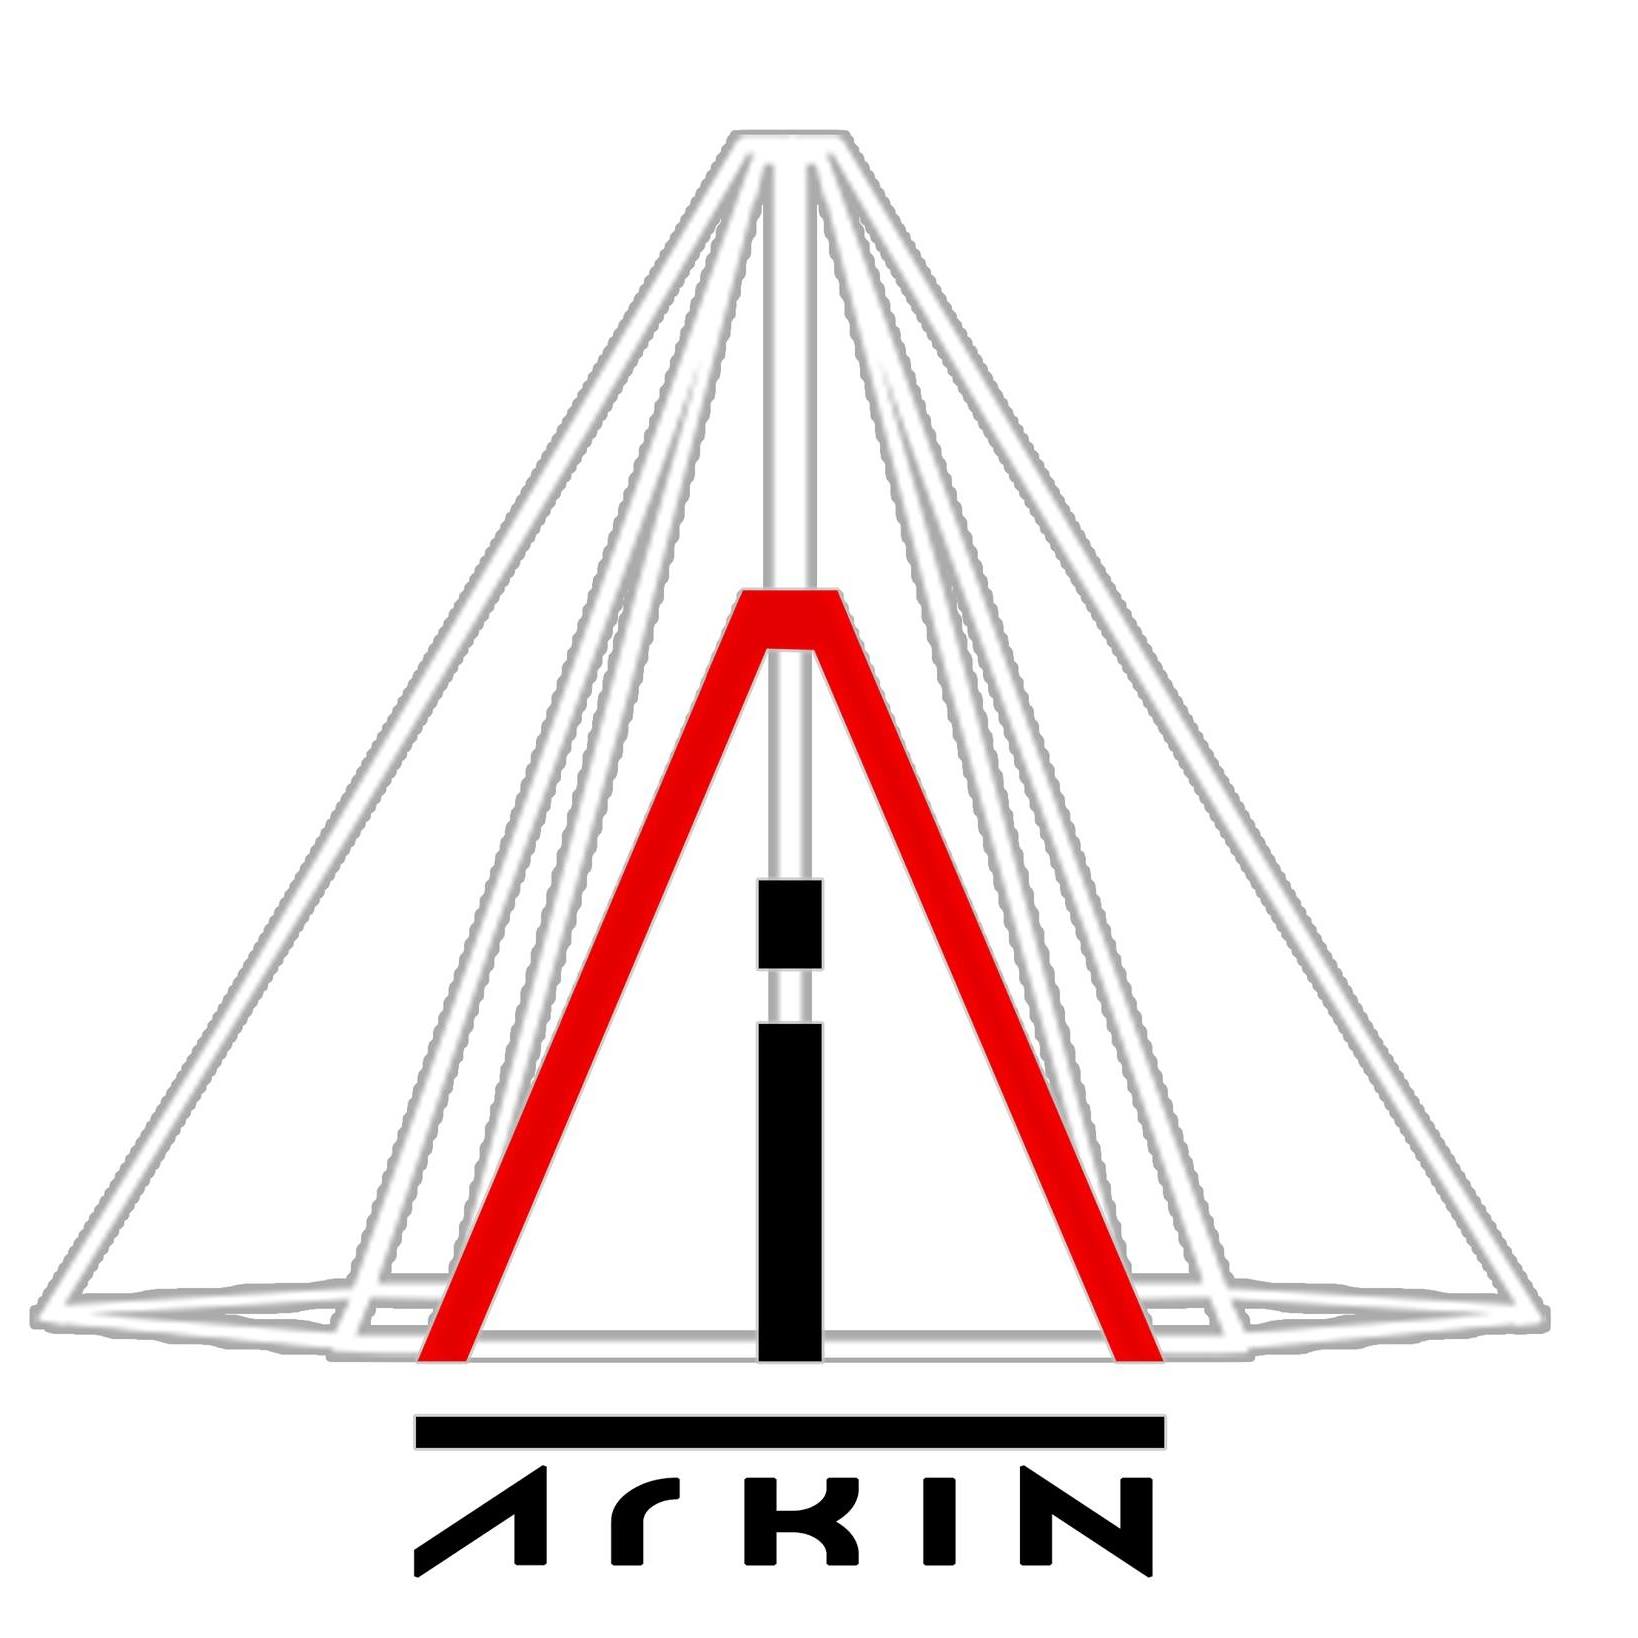 Arkin for Architectural & Interiors|Architect|Professional Services